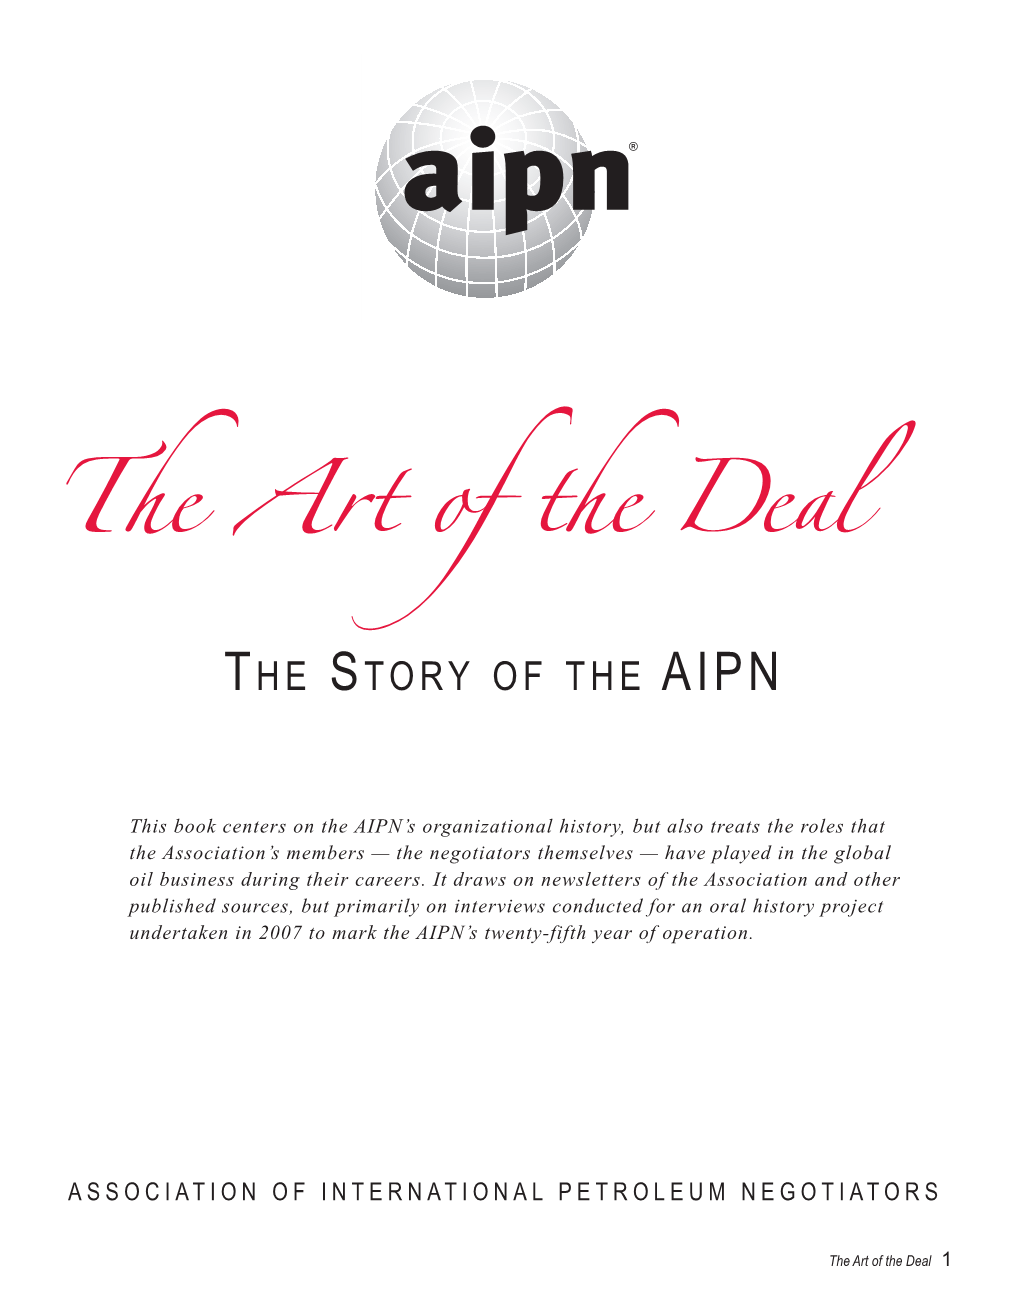 The Story of the Aipn